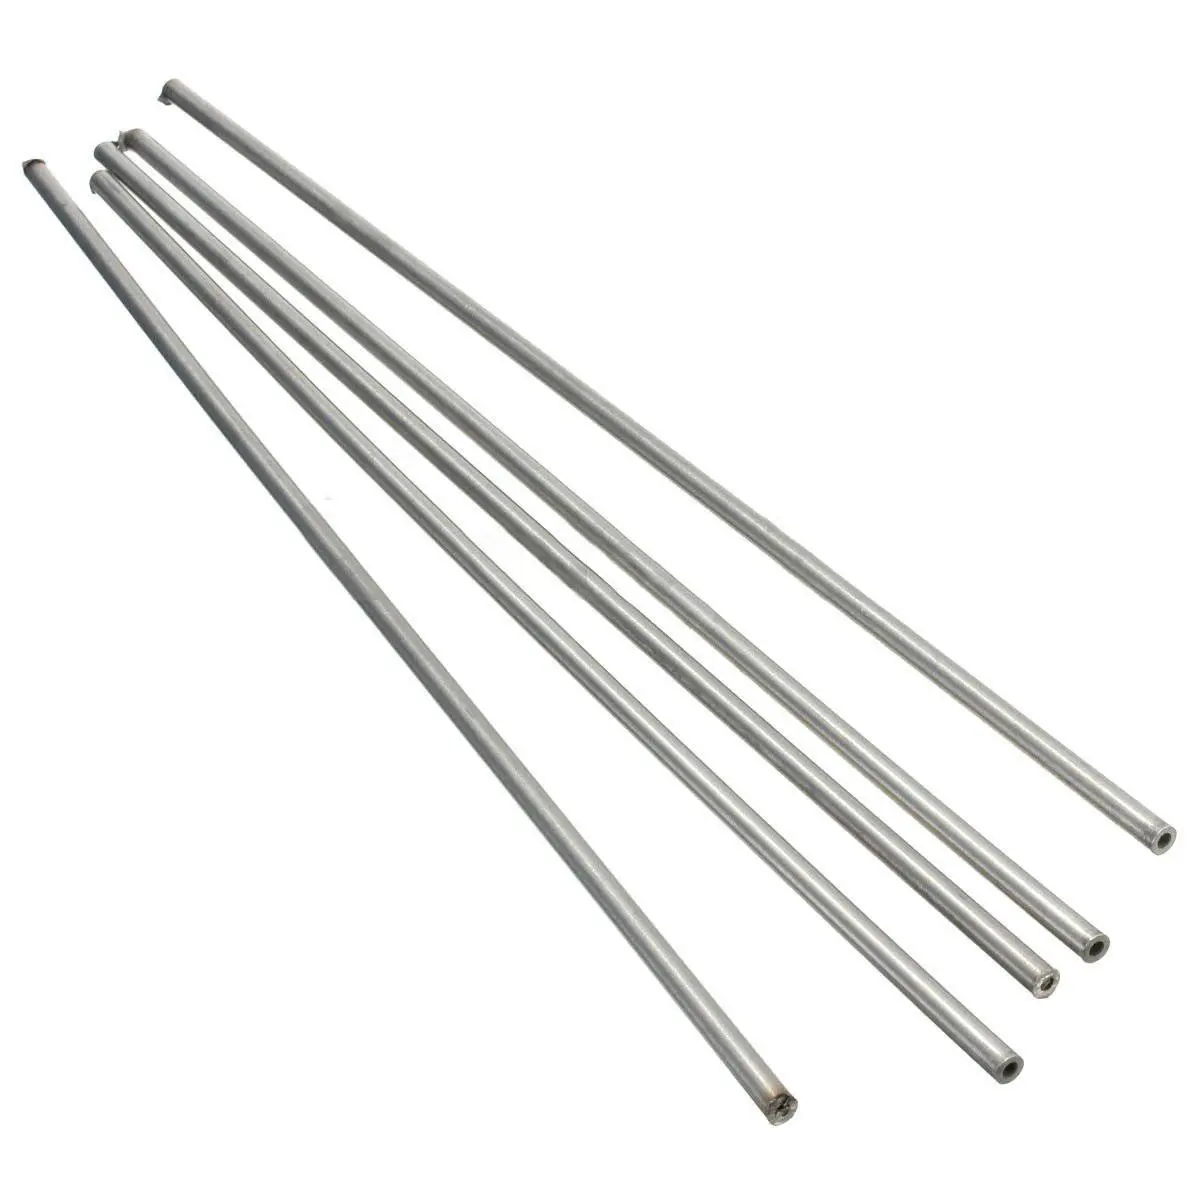 2pc 304 Stainless Steel Capillary Tube 5mm OD 3mm ID 250mm Length. 